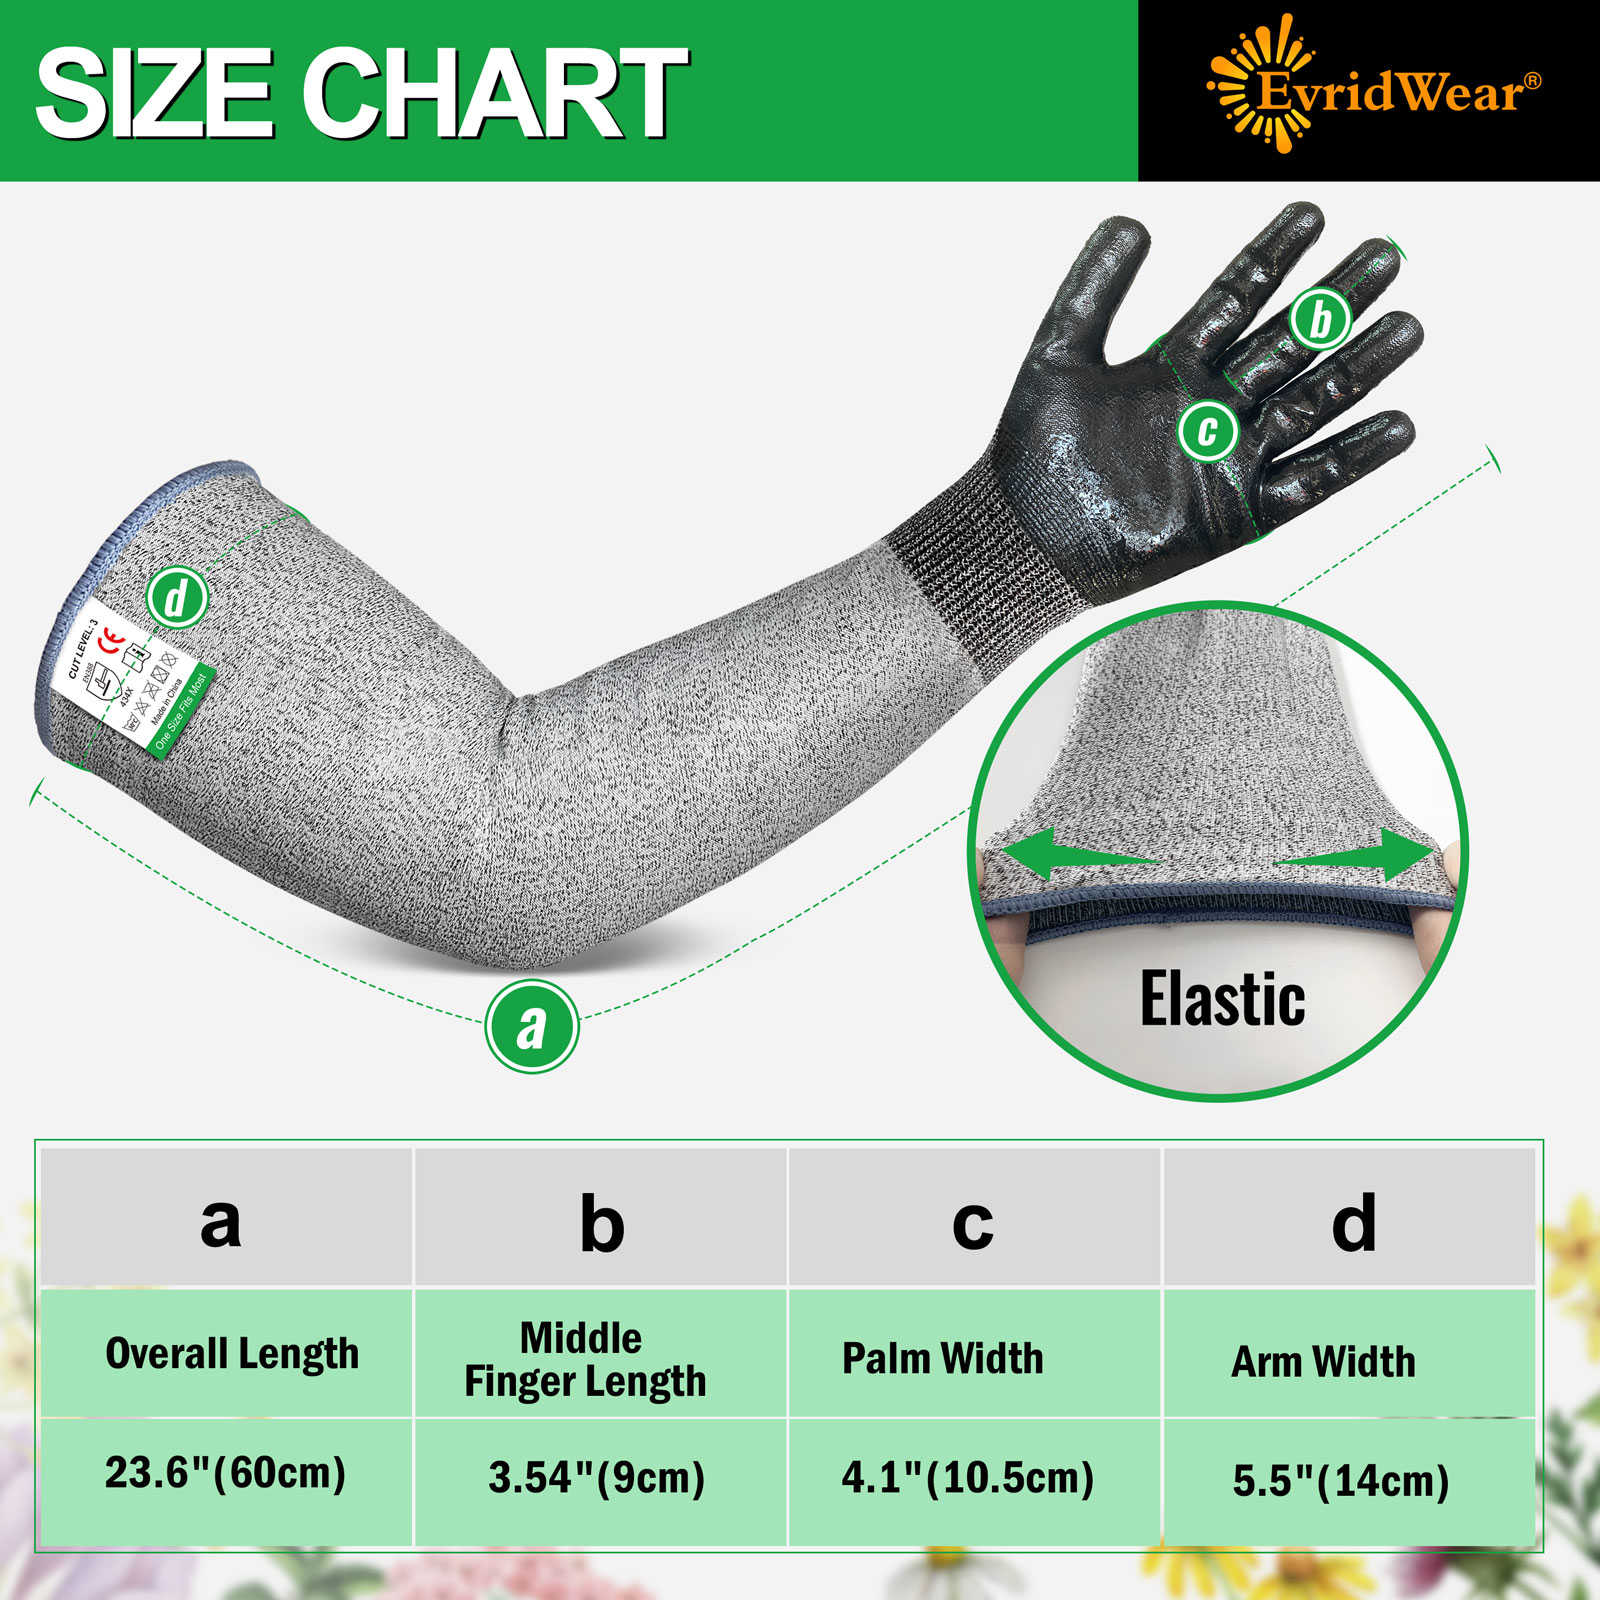 2 Pairs Evridwear Cut Resistant Gloves With Silicone Grip Dots, Food Grade  Level 5 Safety Protection Kitchen Working Kevlar Gloves For Cutting,  Slicing and Garden works (Yellow + Gray) Medium 